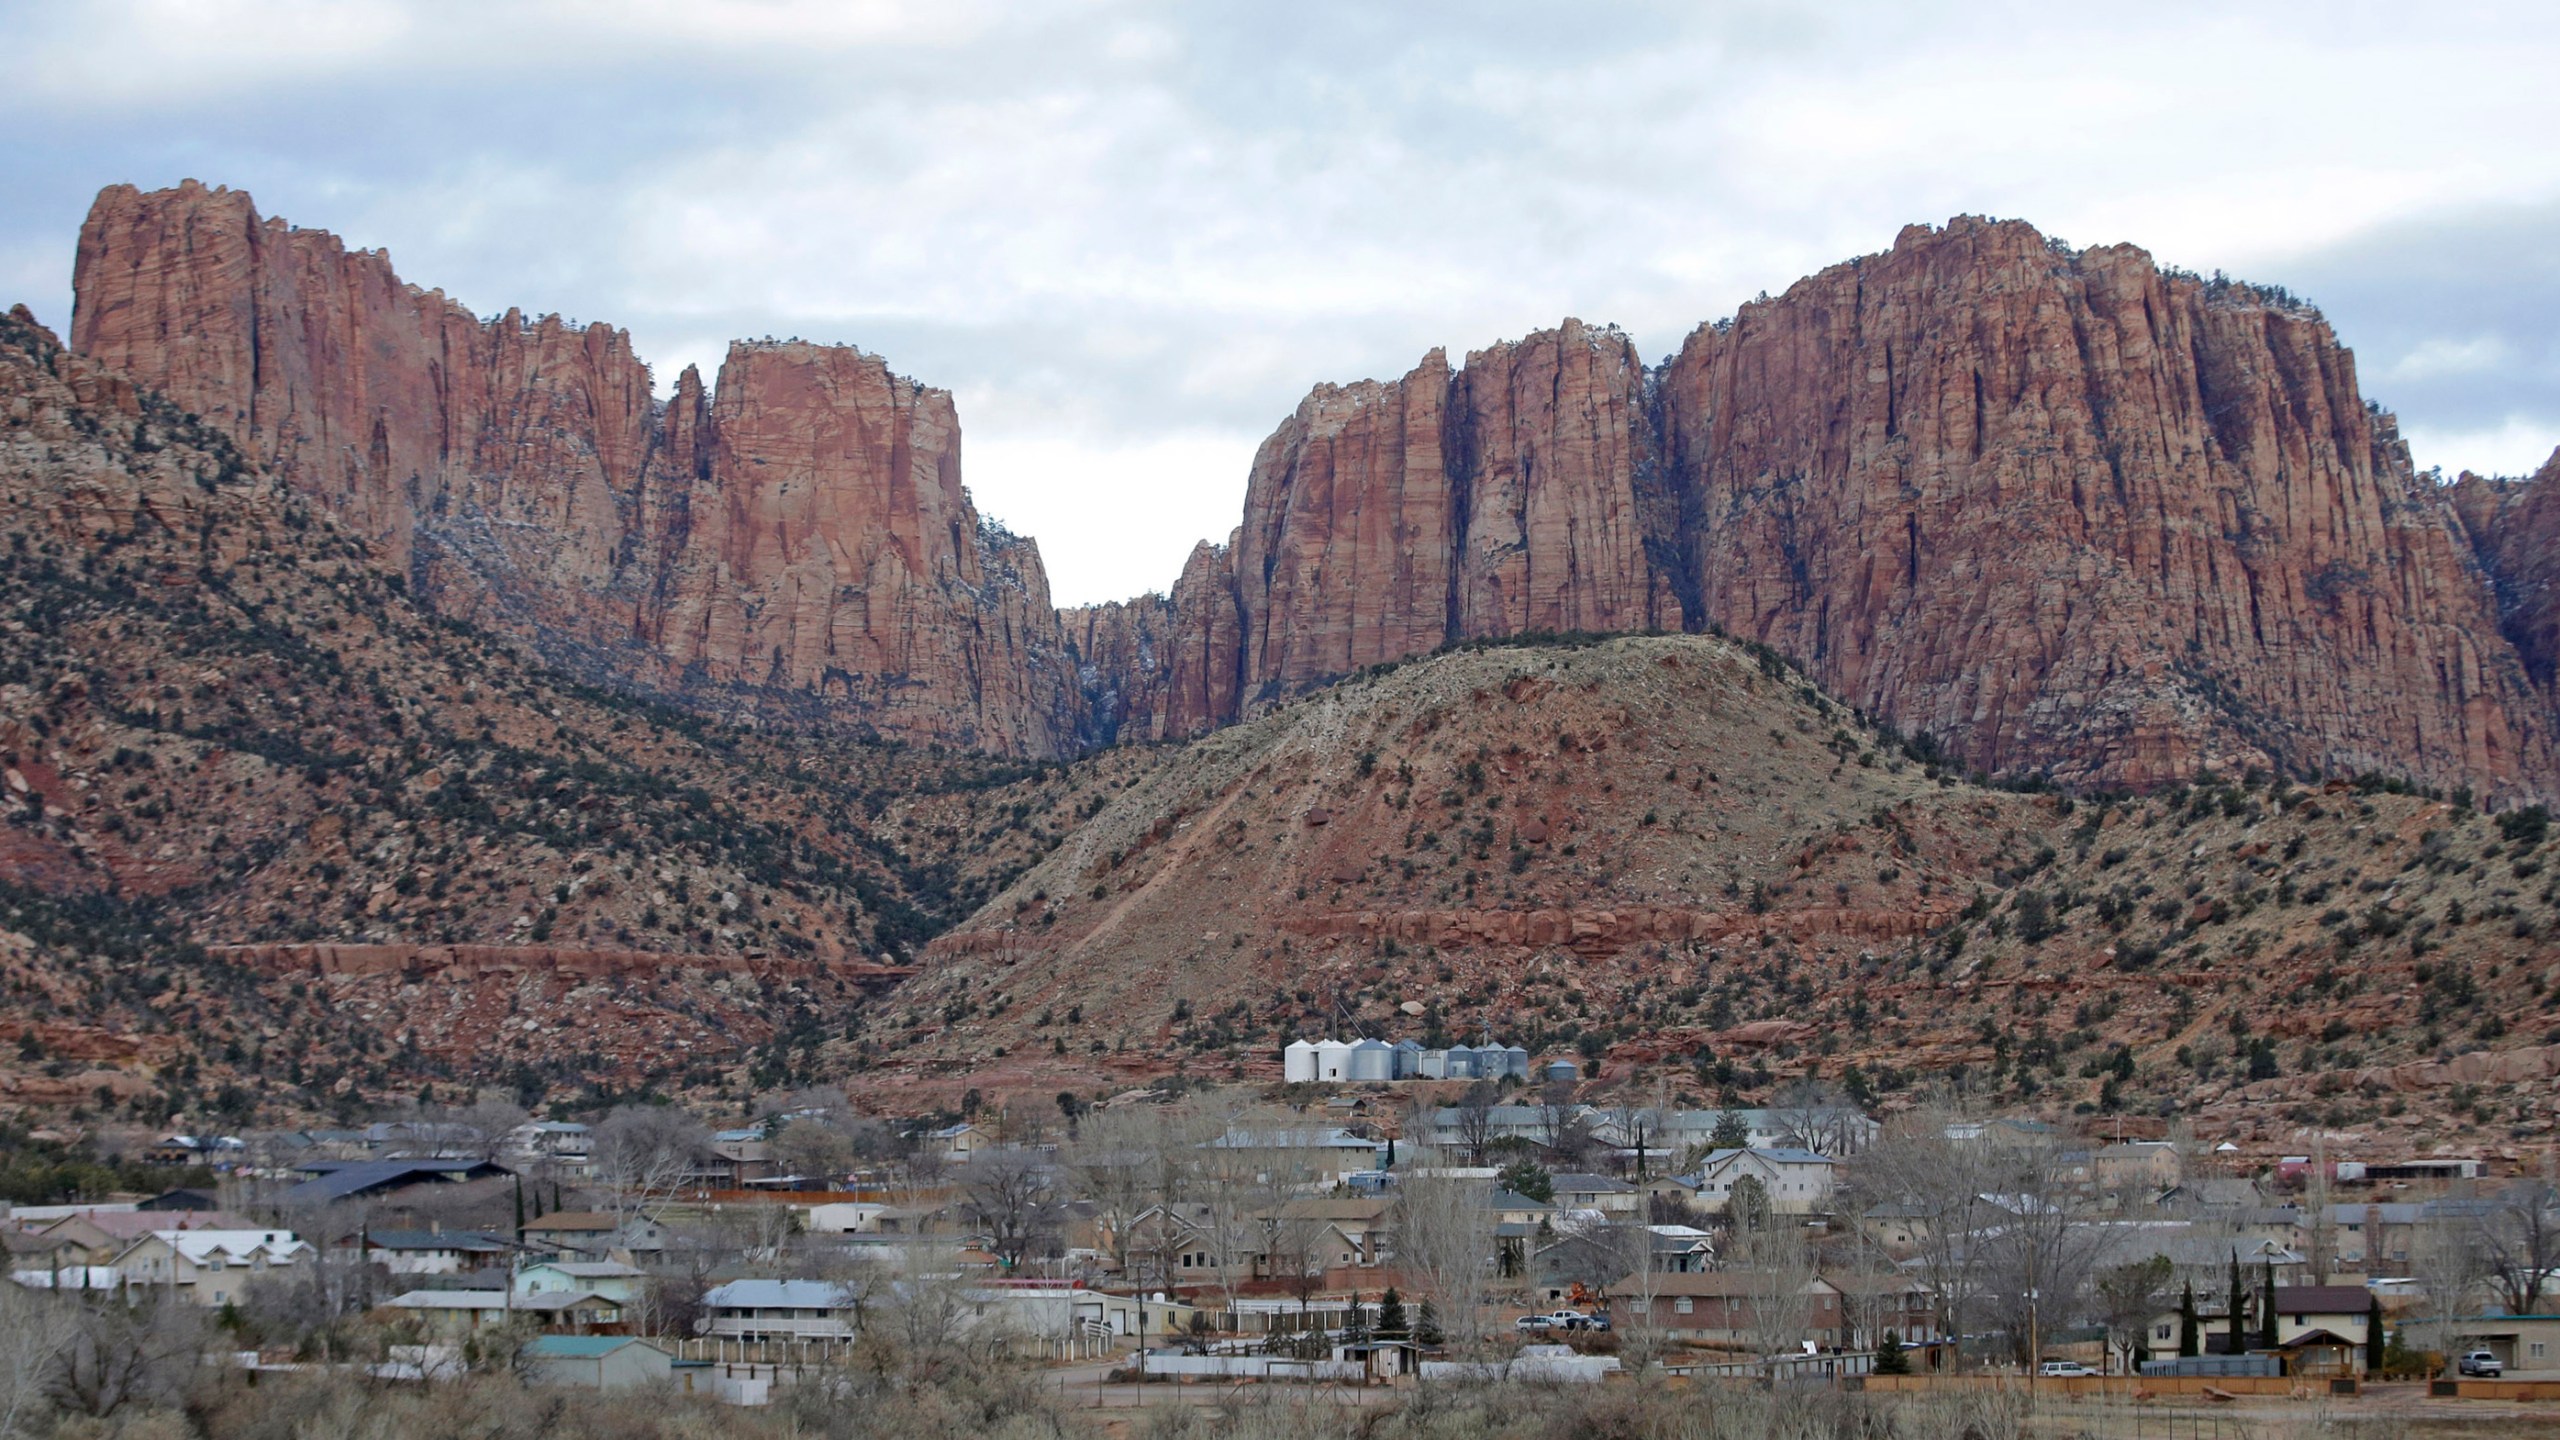 FILE - Hildale, Utah, is pictured sitting at the base of Red Rock Cliff mountains, with its sister city, Colorado City, Ariz., in the foreground on Dec. 16, 2014. On Tuesday, March 19, 2024, a businessman pleaded guilty to conspiring with the leader of an offshoot polygamous sect in the Colorado City-Hildale area to transport underage girls across state lines for sexual activity. The guilty plea by 53-year-old Moroni Johnson marked the first man to be convicted in what authorities say was a scheme to orchestrate sexual acts involving children. (AP Photo/Rick Bowmer, File)